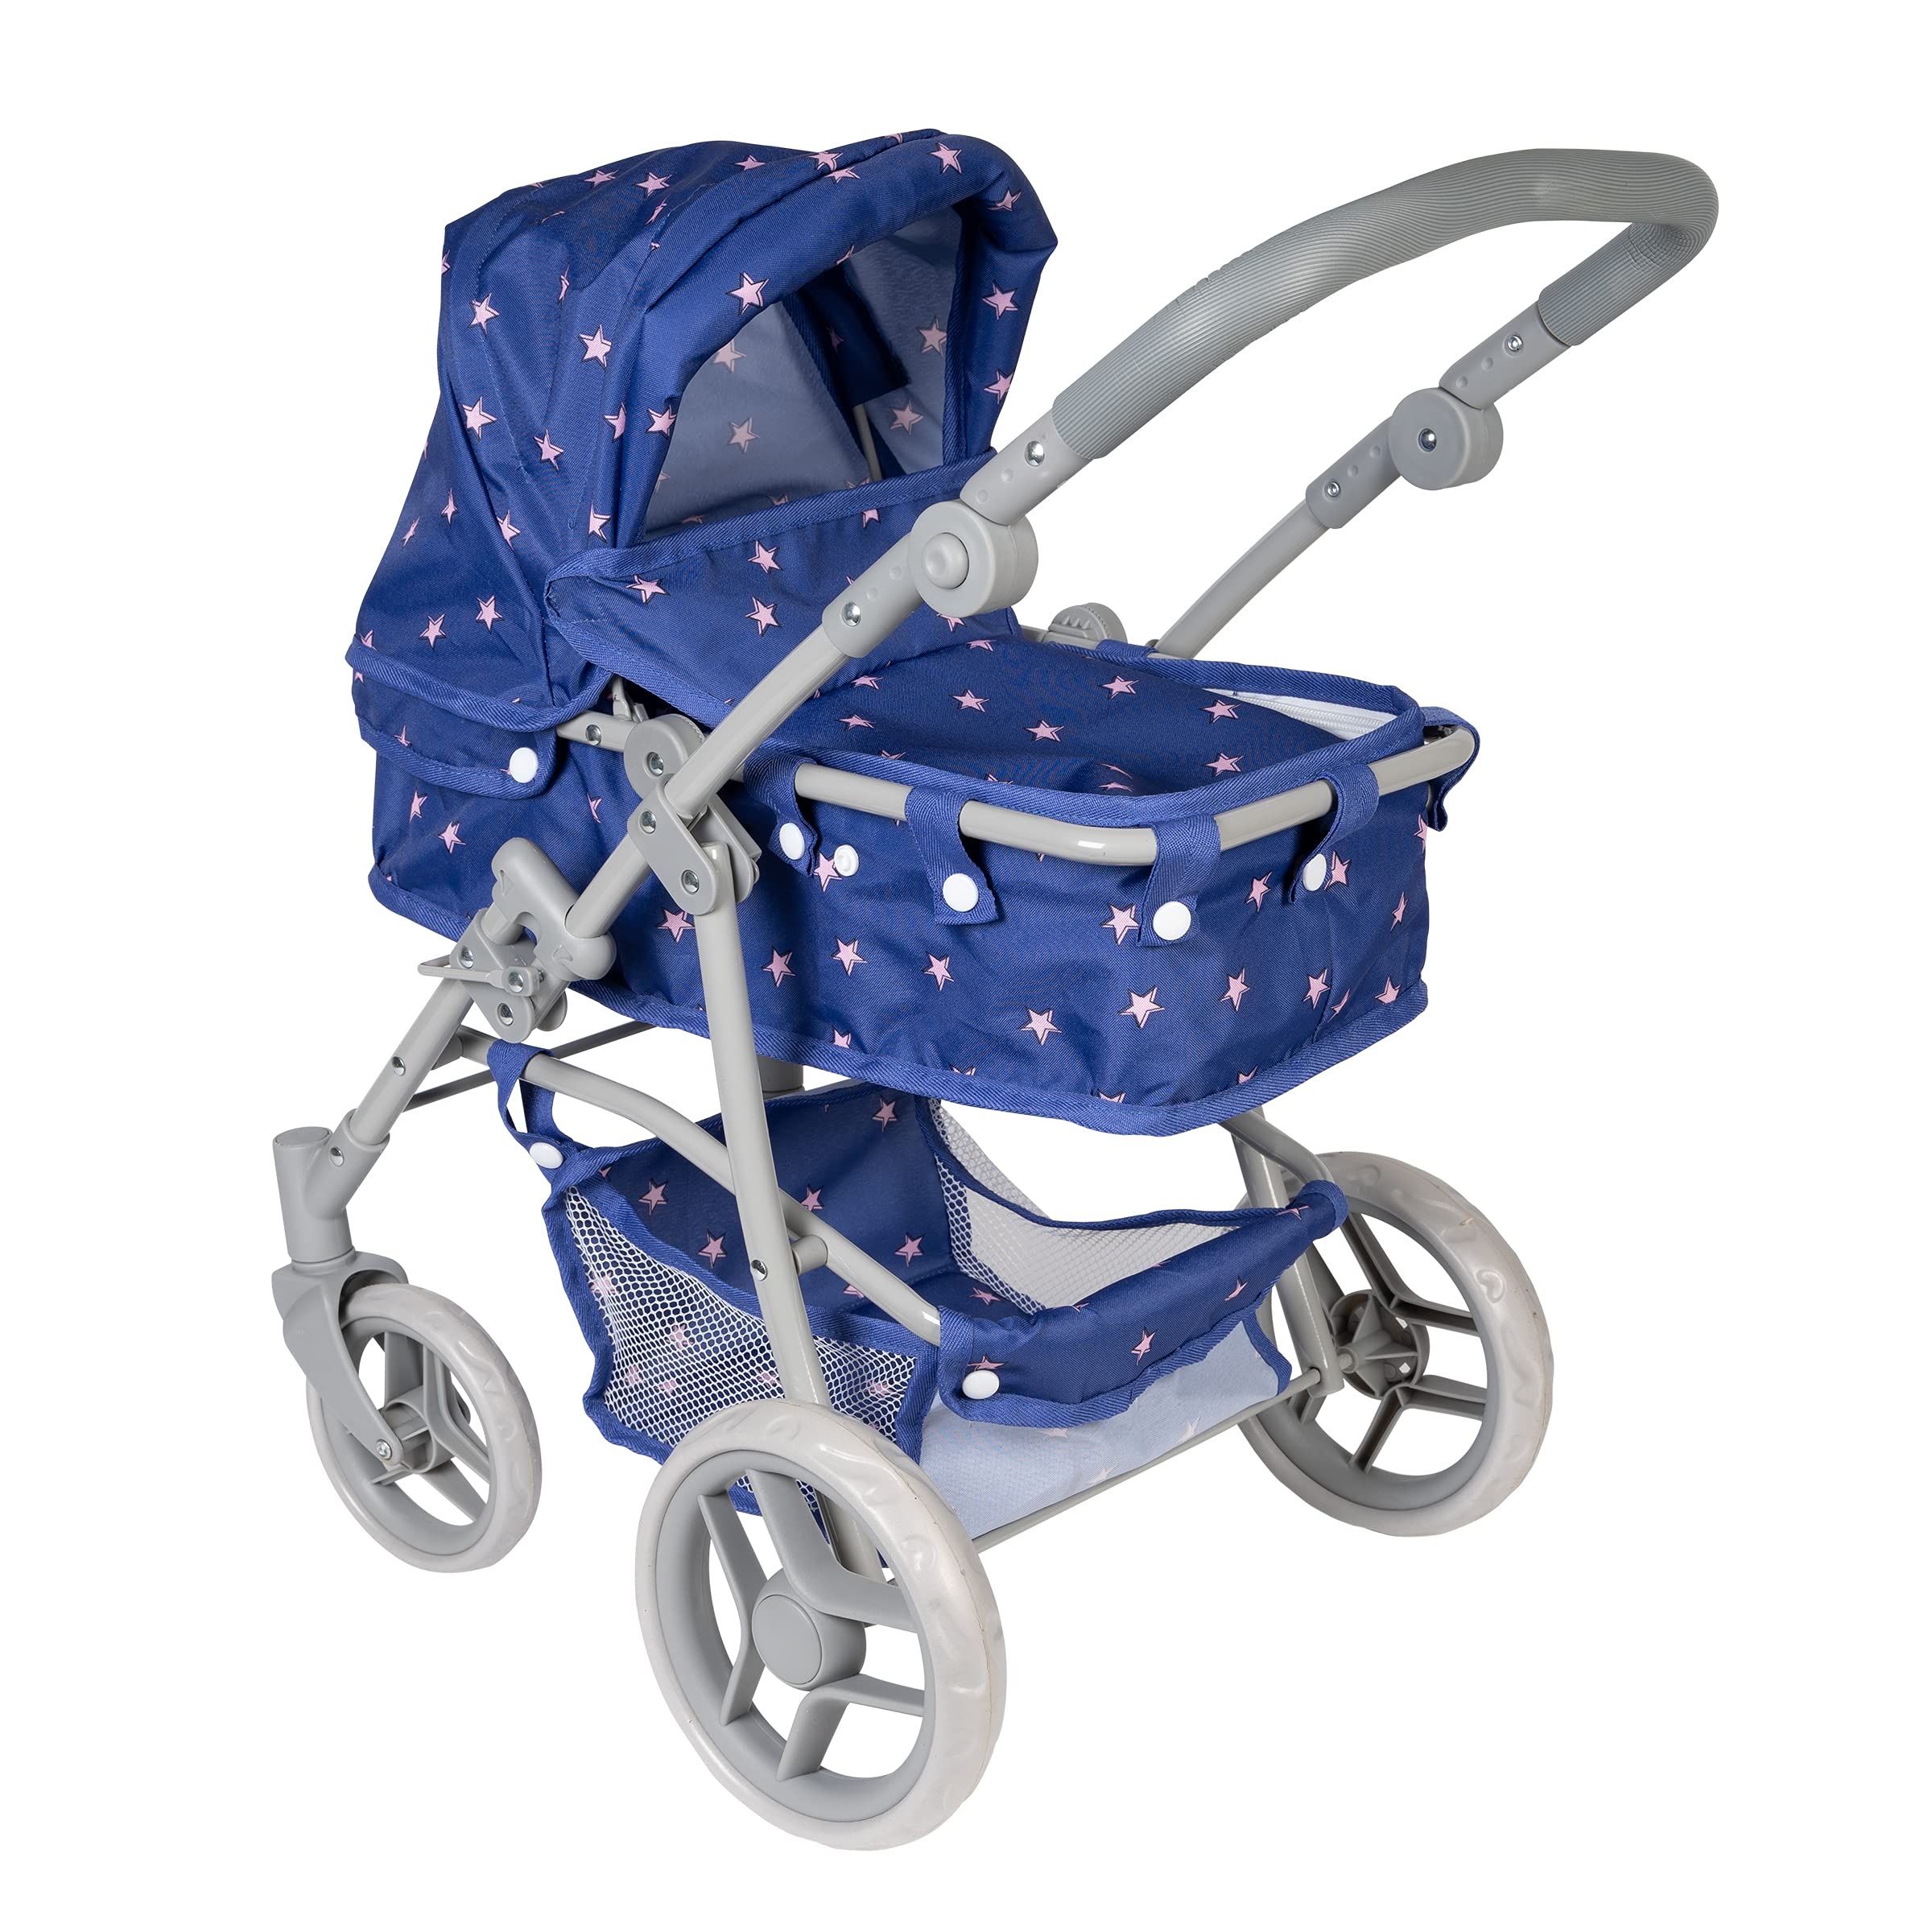 ADORA Baby Doll Stroller, 2-in-1 Convertible Starry Night Stroller, Fits Dolls Up to 20 Inches